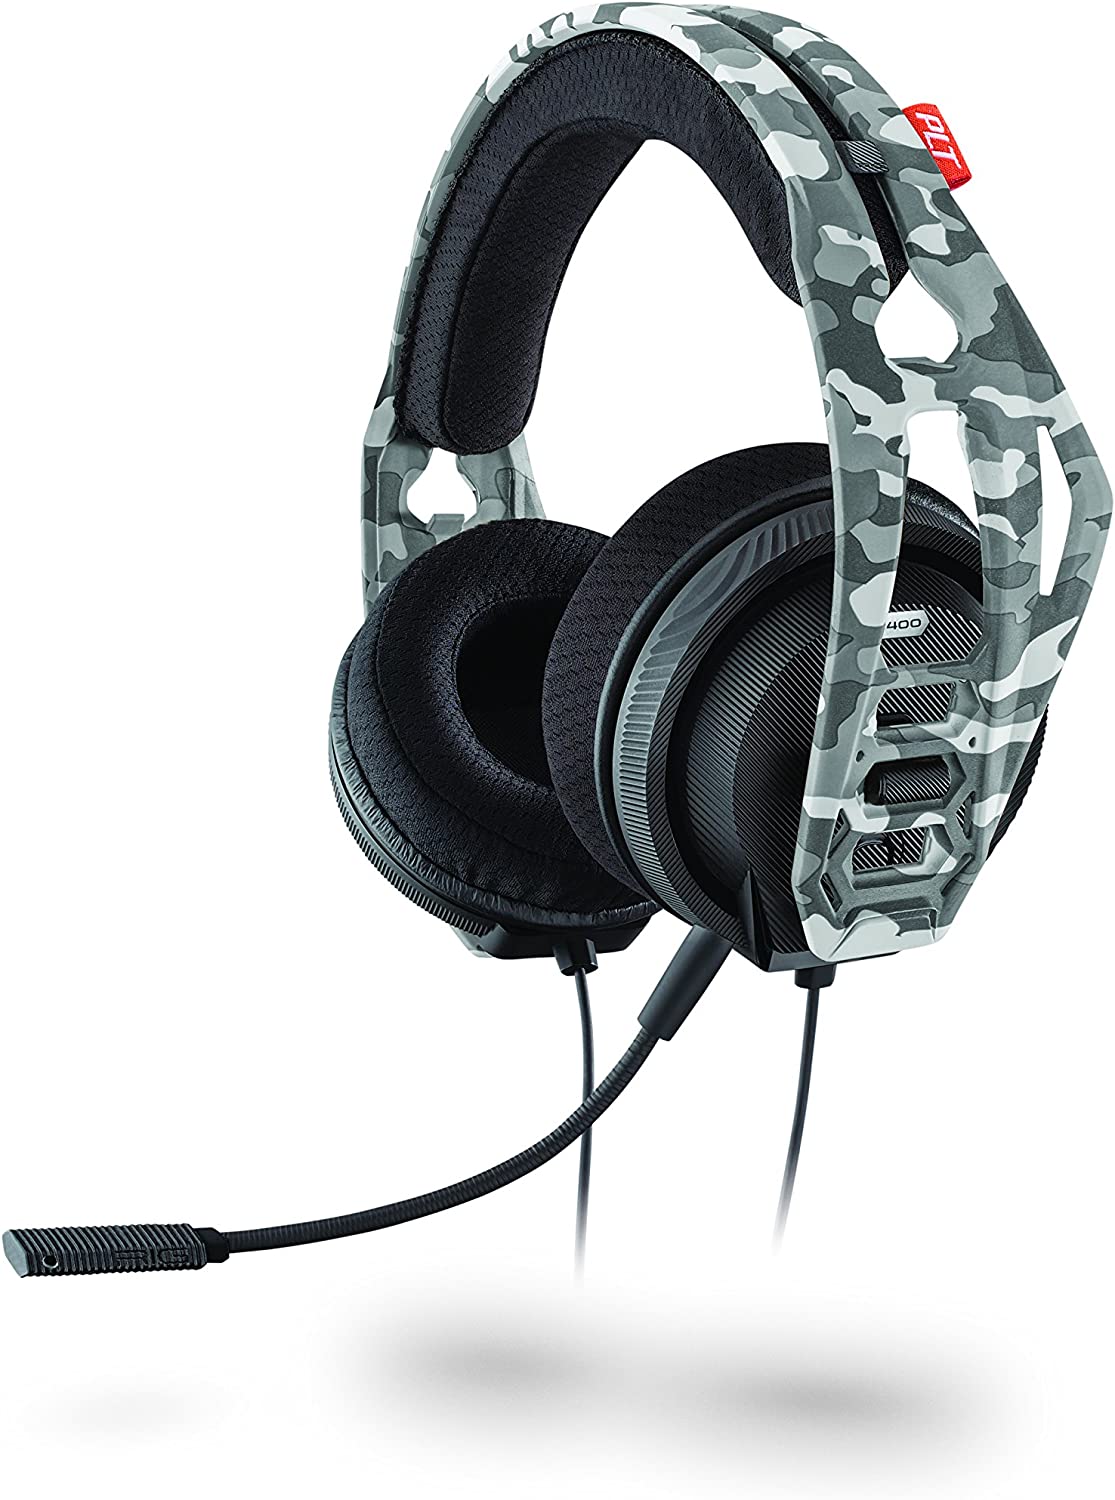 4Gamers PRO4-70 Stereo Gaming Headset - Arctic Camo (PS4)